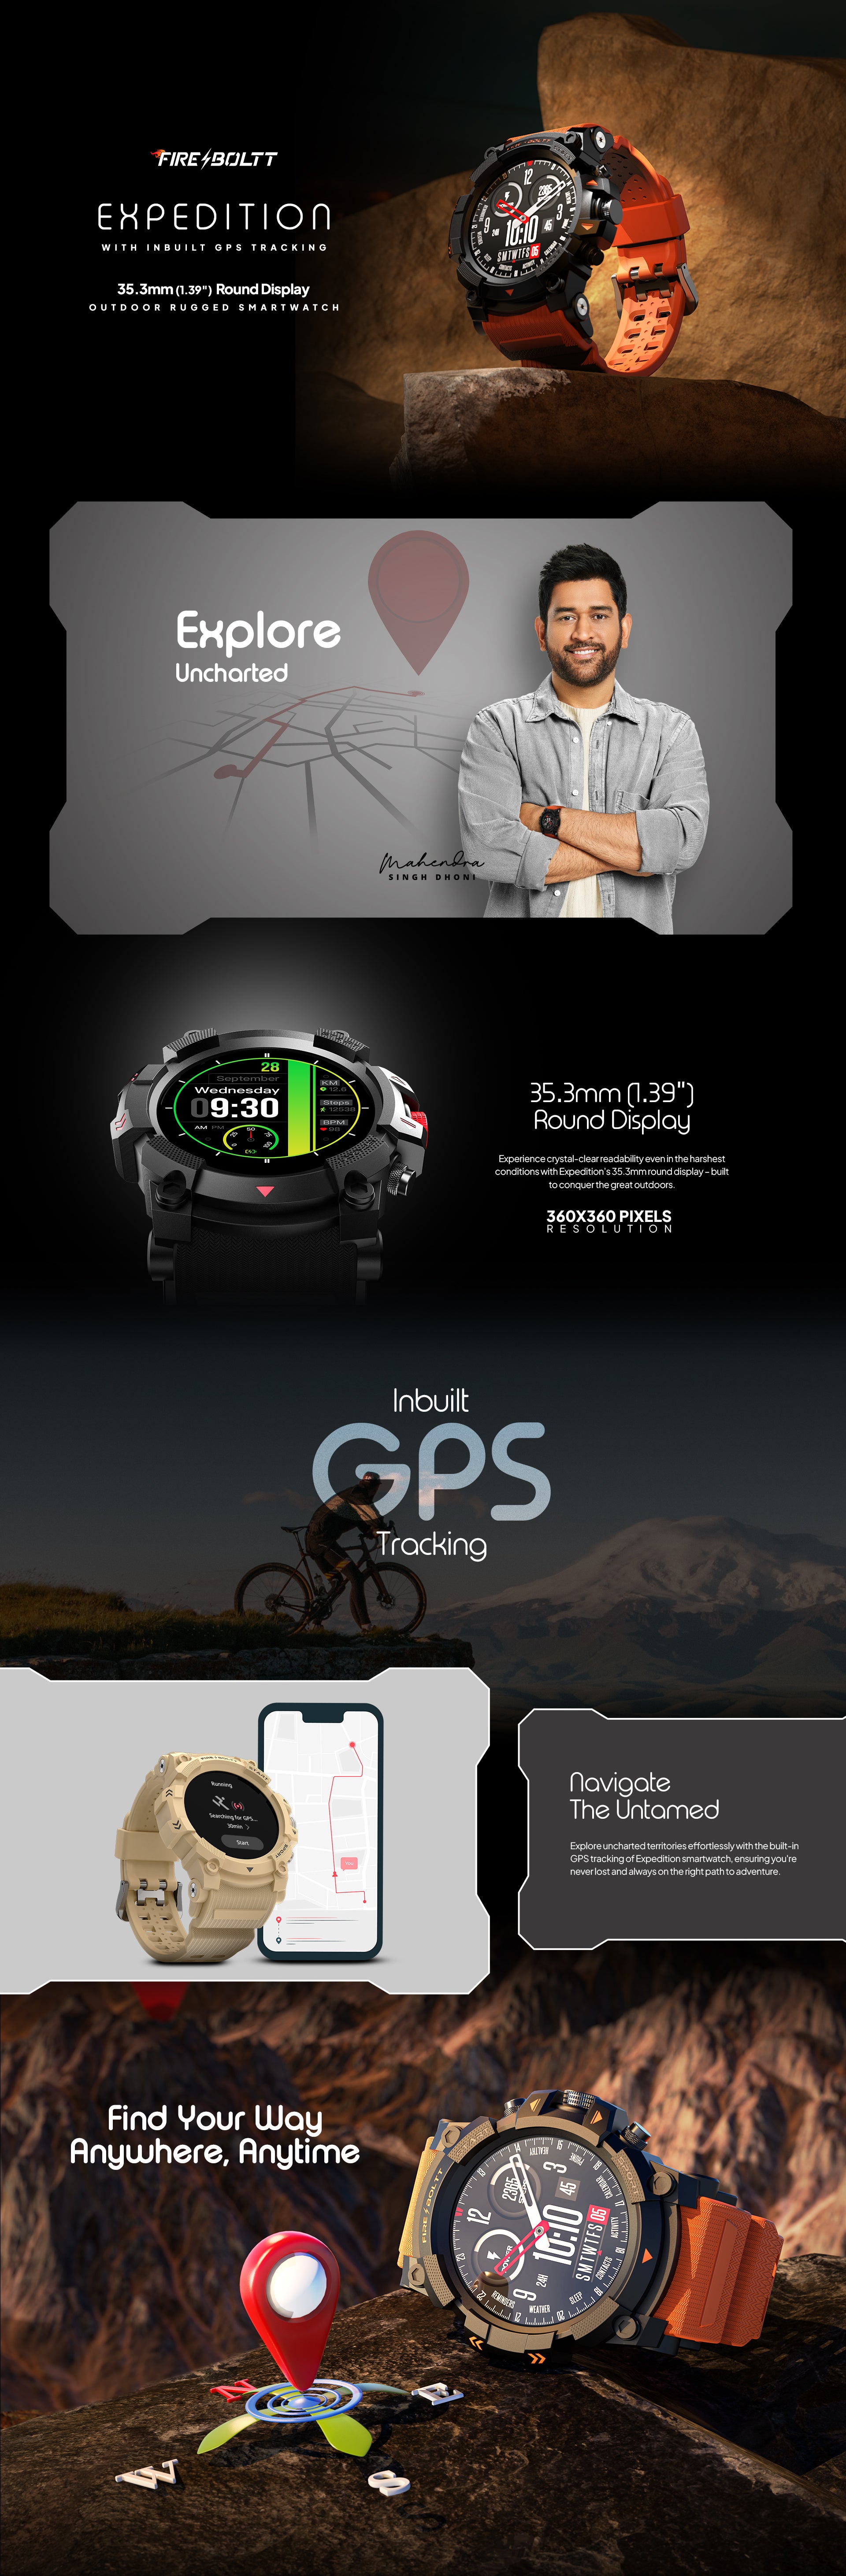 Fire-Boltt Expedition Experience Ultimate Outdoor Adventure With Smartwatch